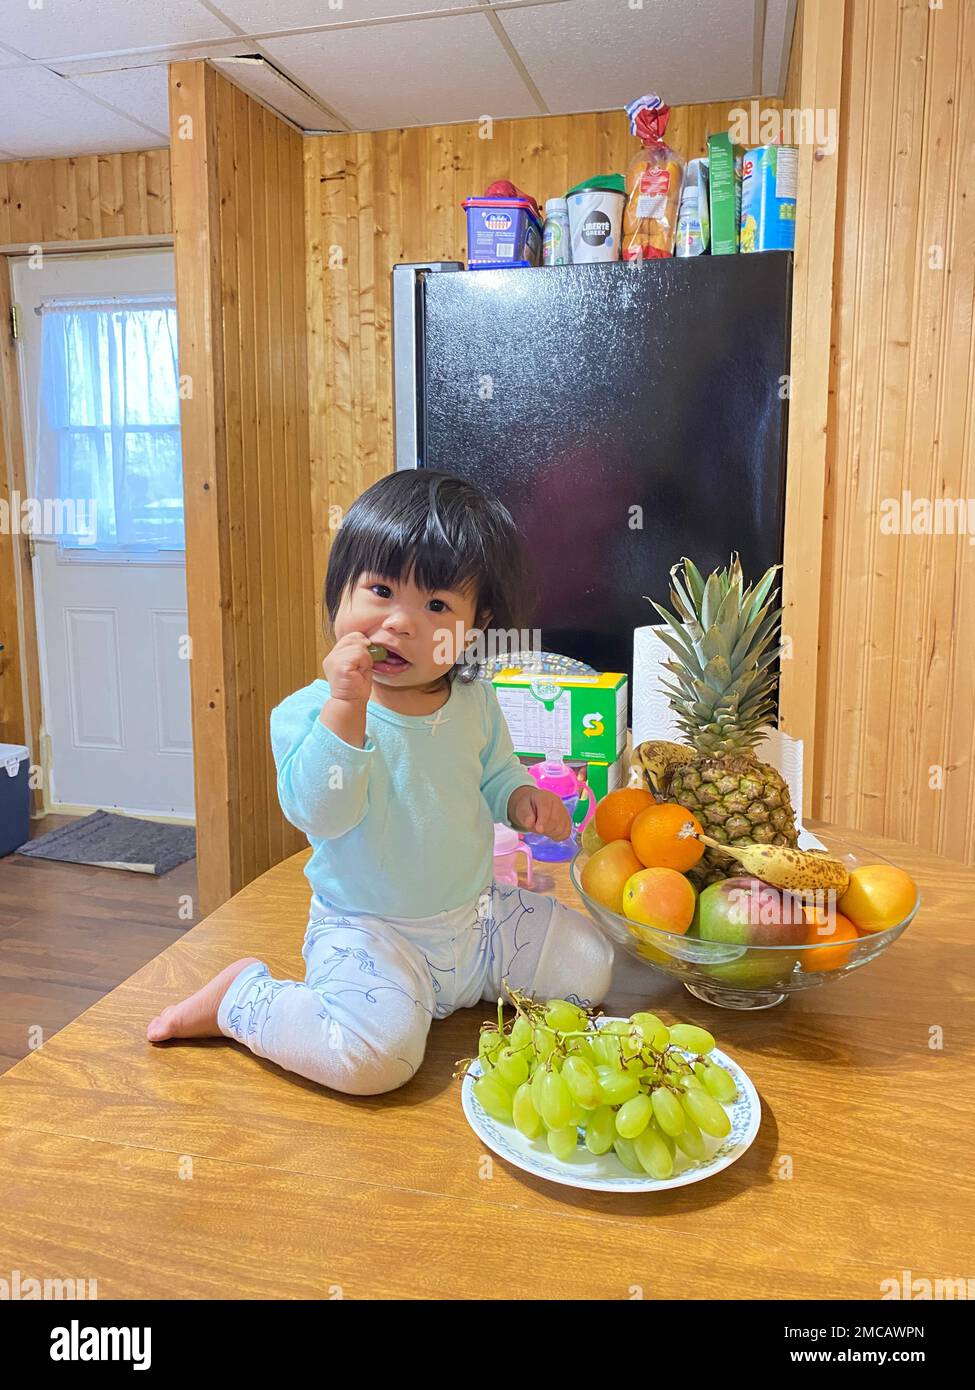 An Asian kid eating fruits on a table Stock Photo